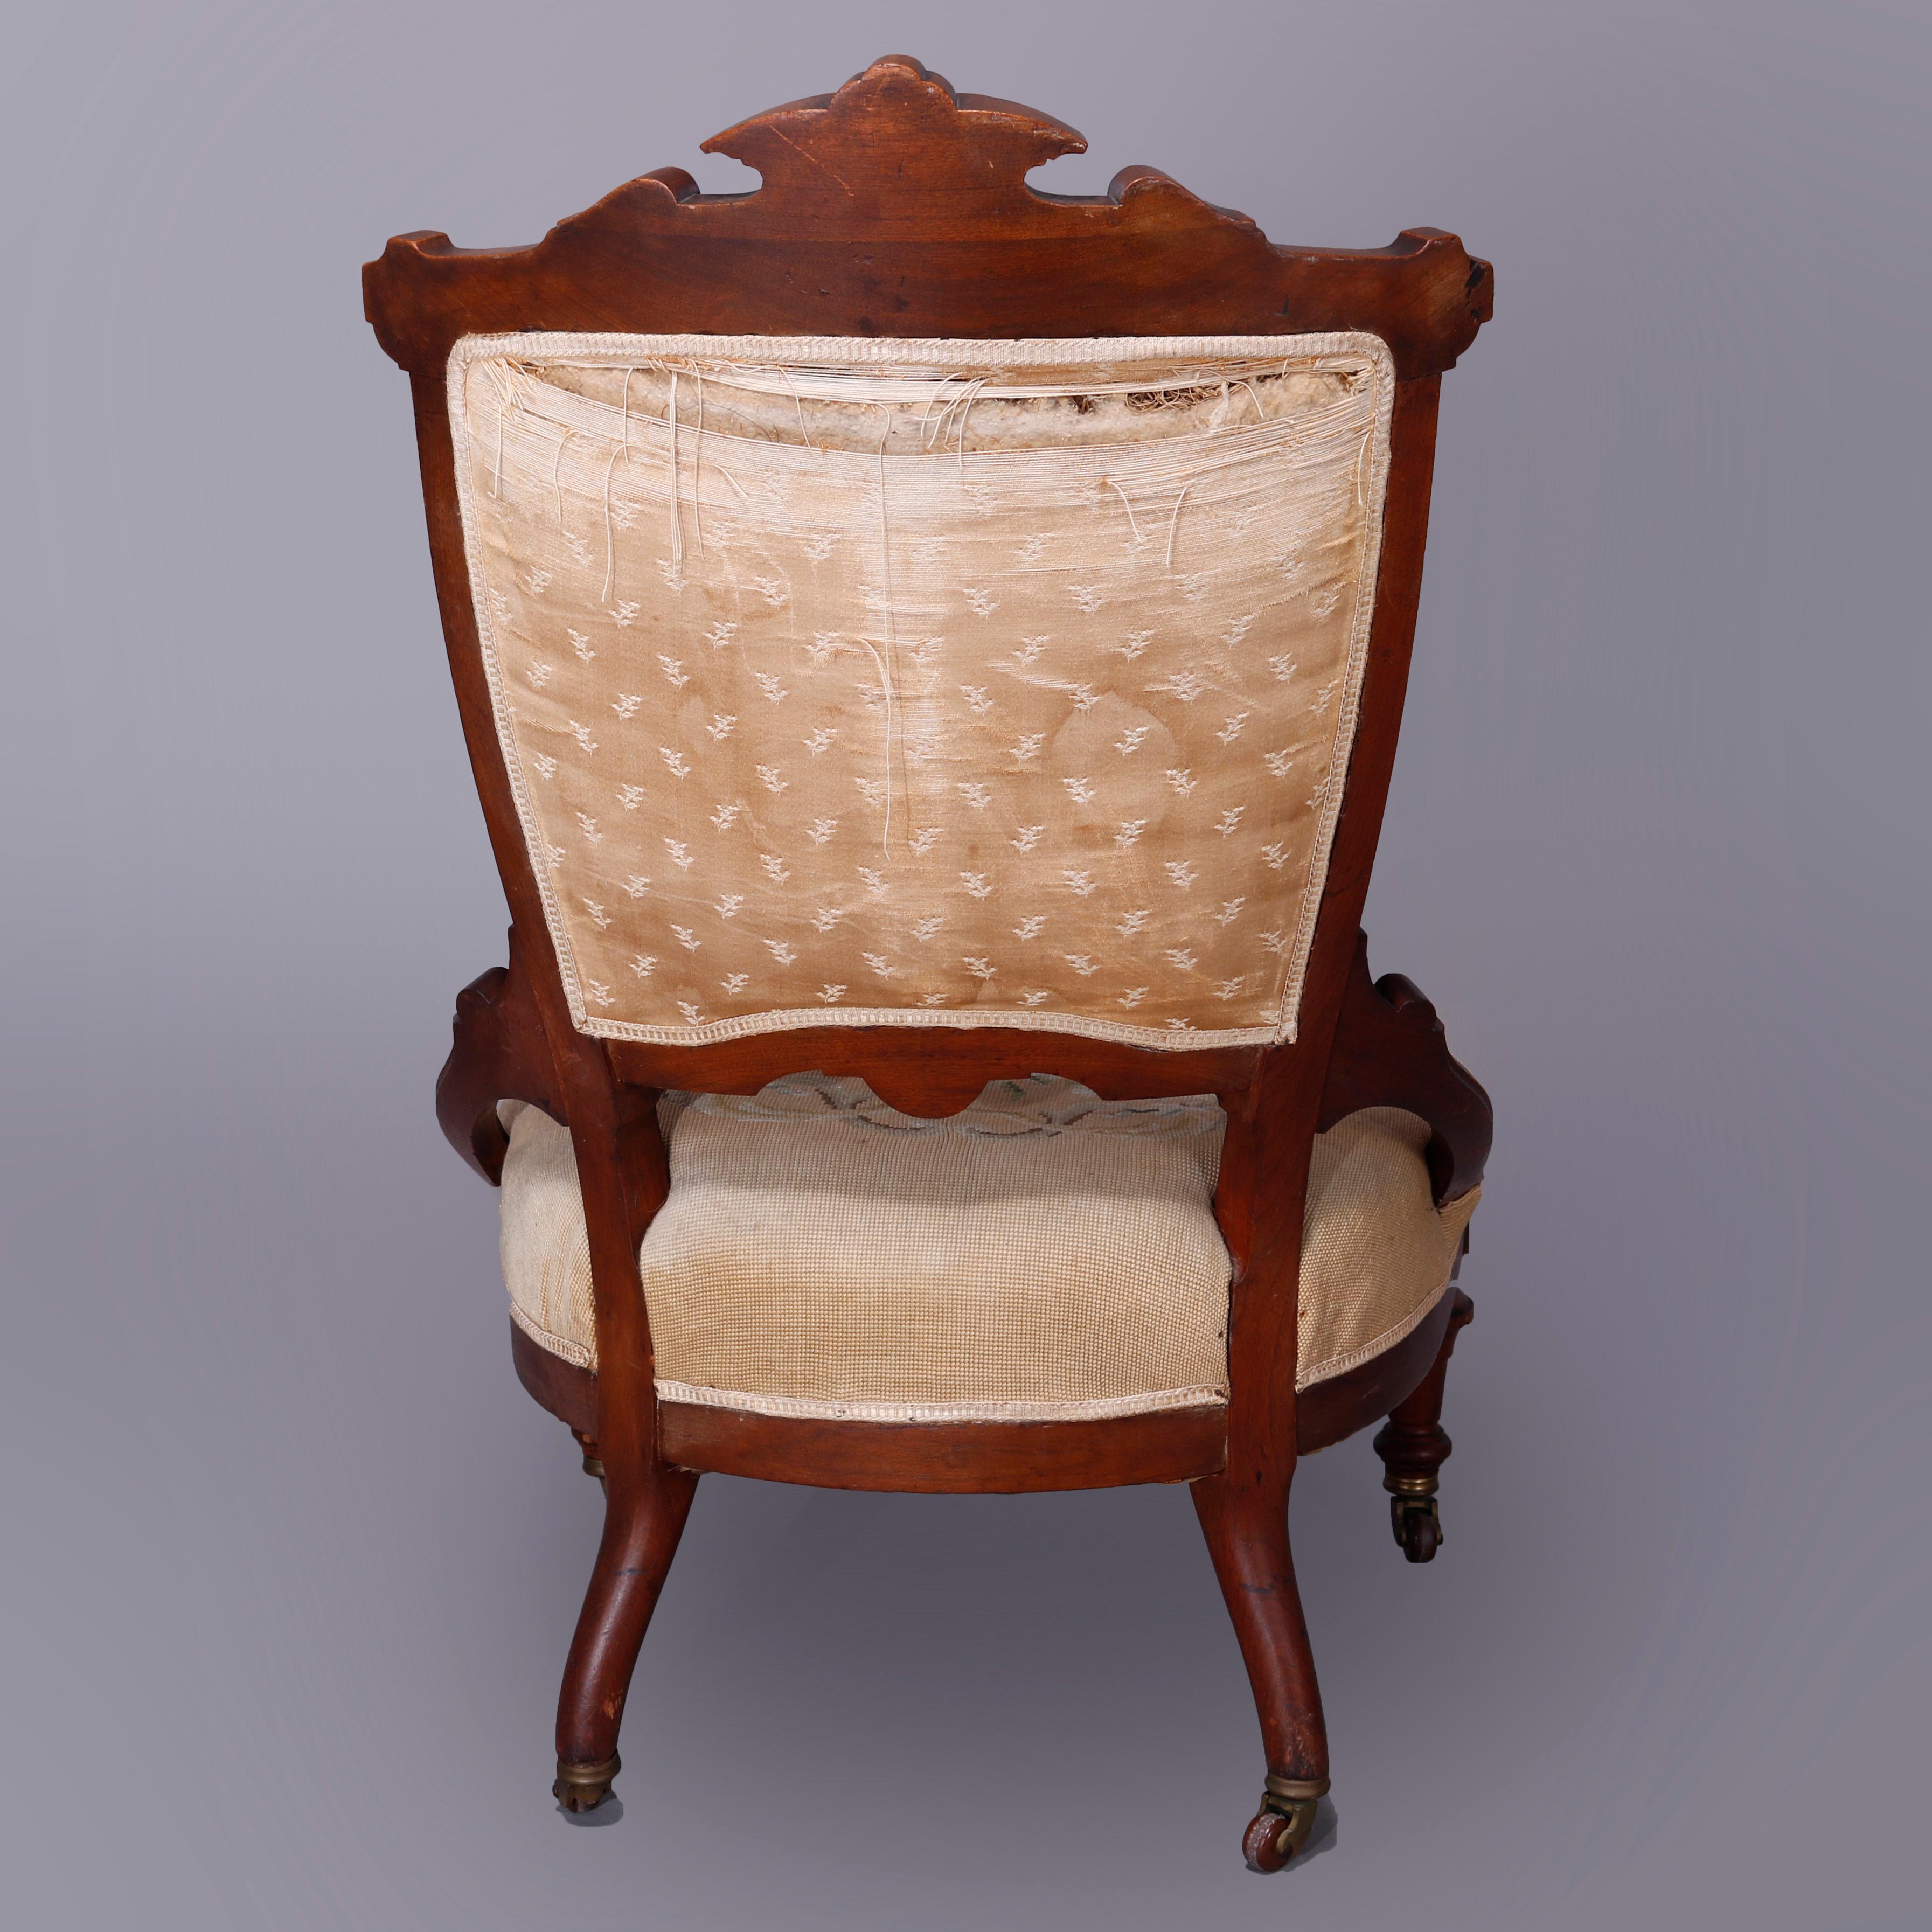 Antique Renaissance Revival Walnut, Burl & Needlepoint Parlor Chairs, c1890 In Good Condition For Sale In Big Flats, NY